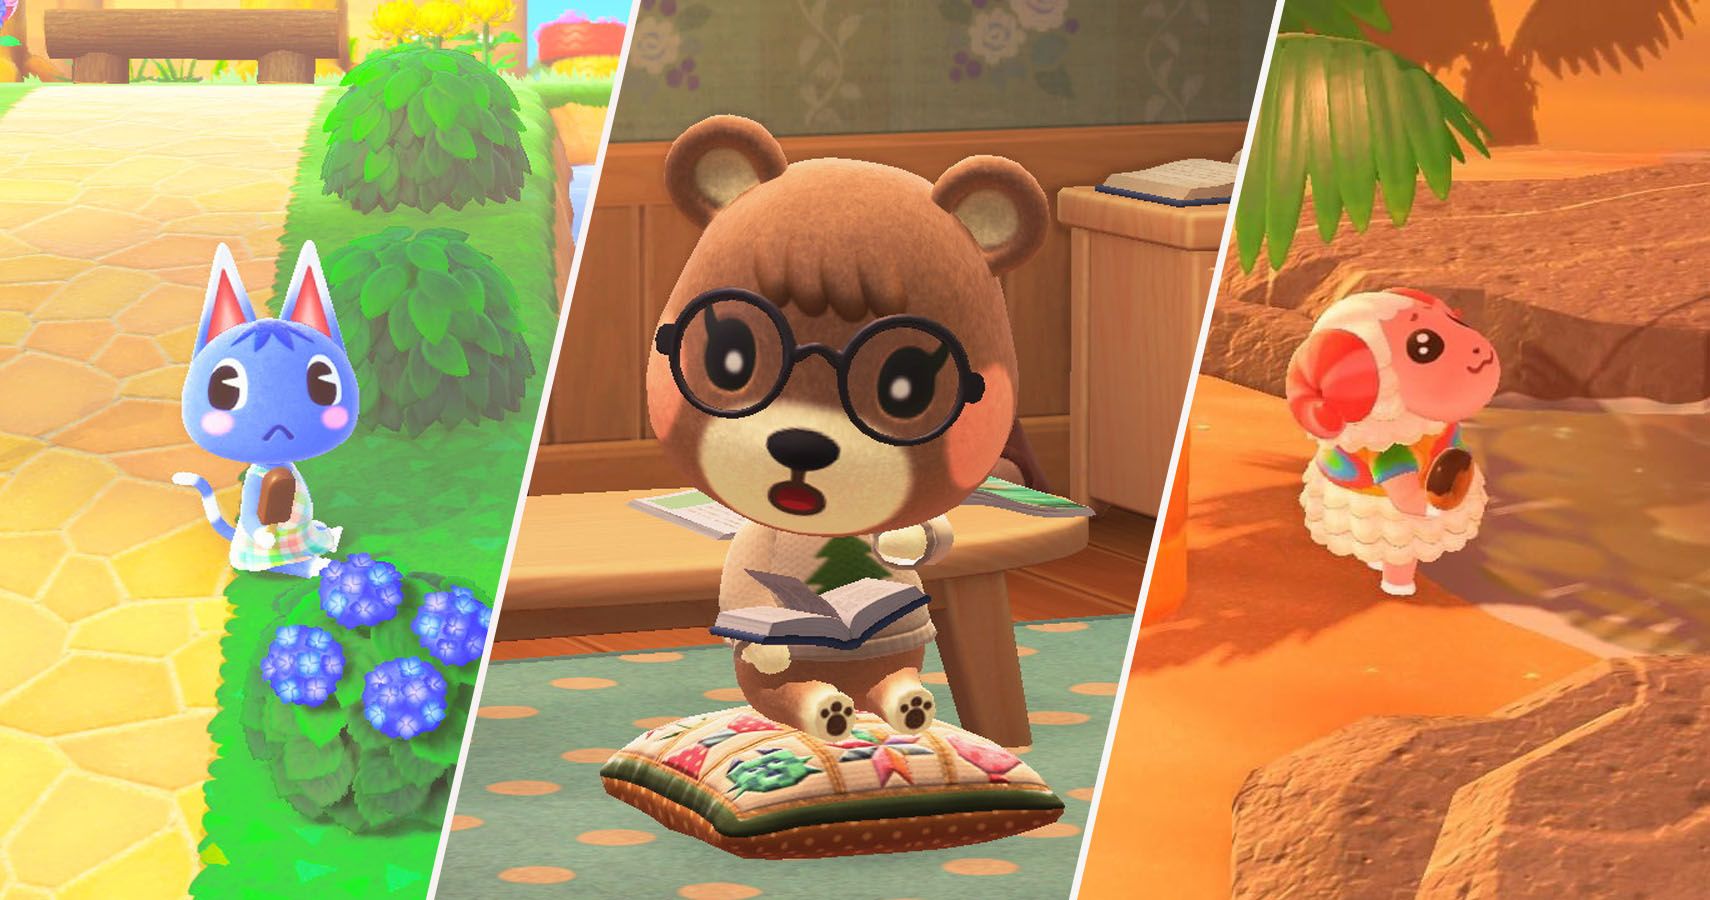 Download The 15 Cutest Villagers From Animal Crossing, Ranked | Game Rant - EnD# Gaming